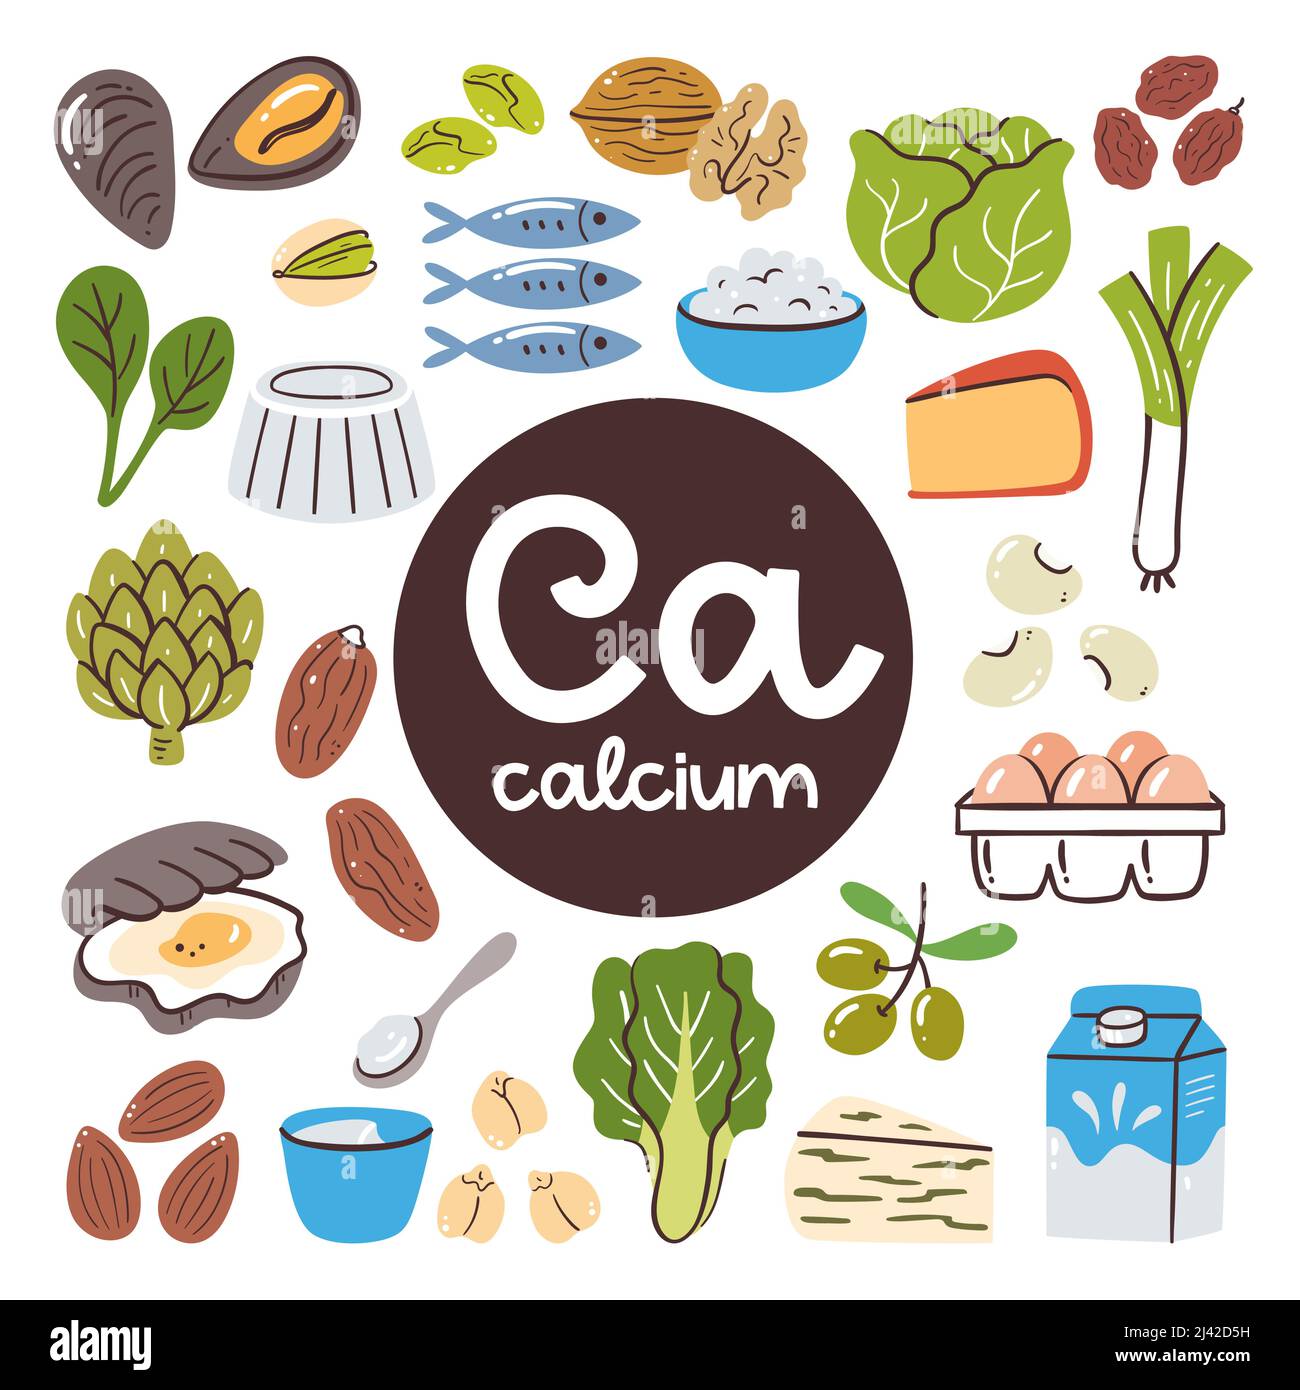 Food products with high level of Calcium. Cooking ingredients. Vegetables, dairy products, nuts, seafish. Stock Vector